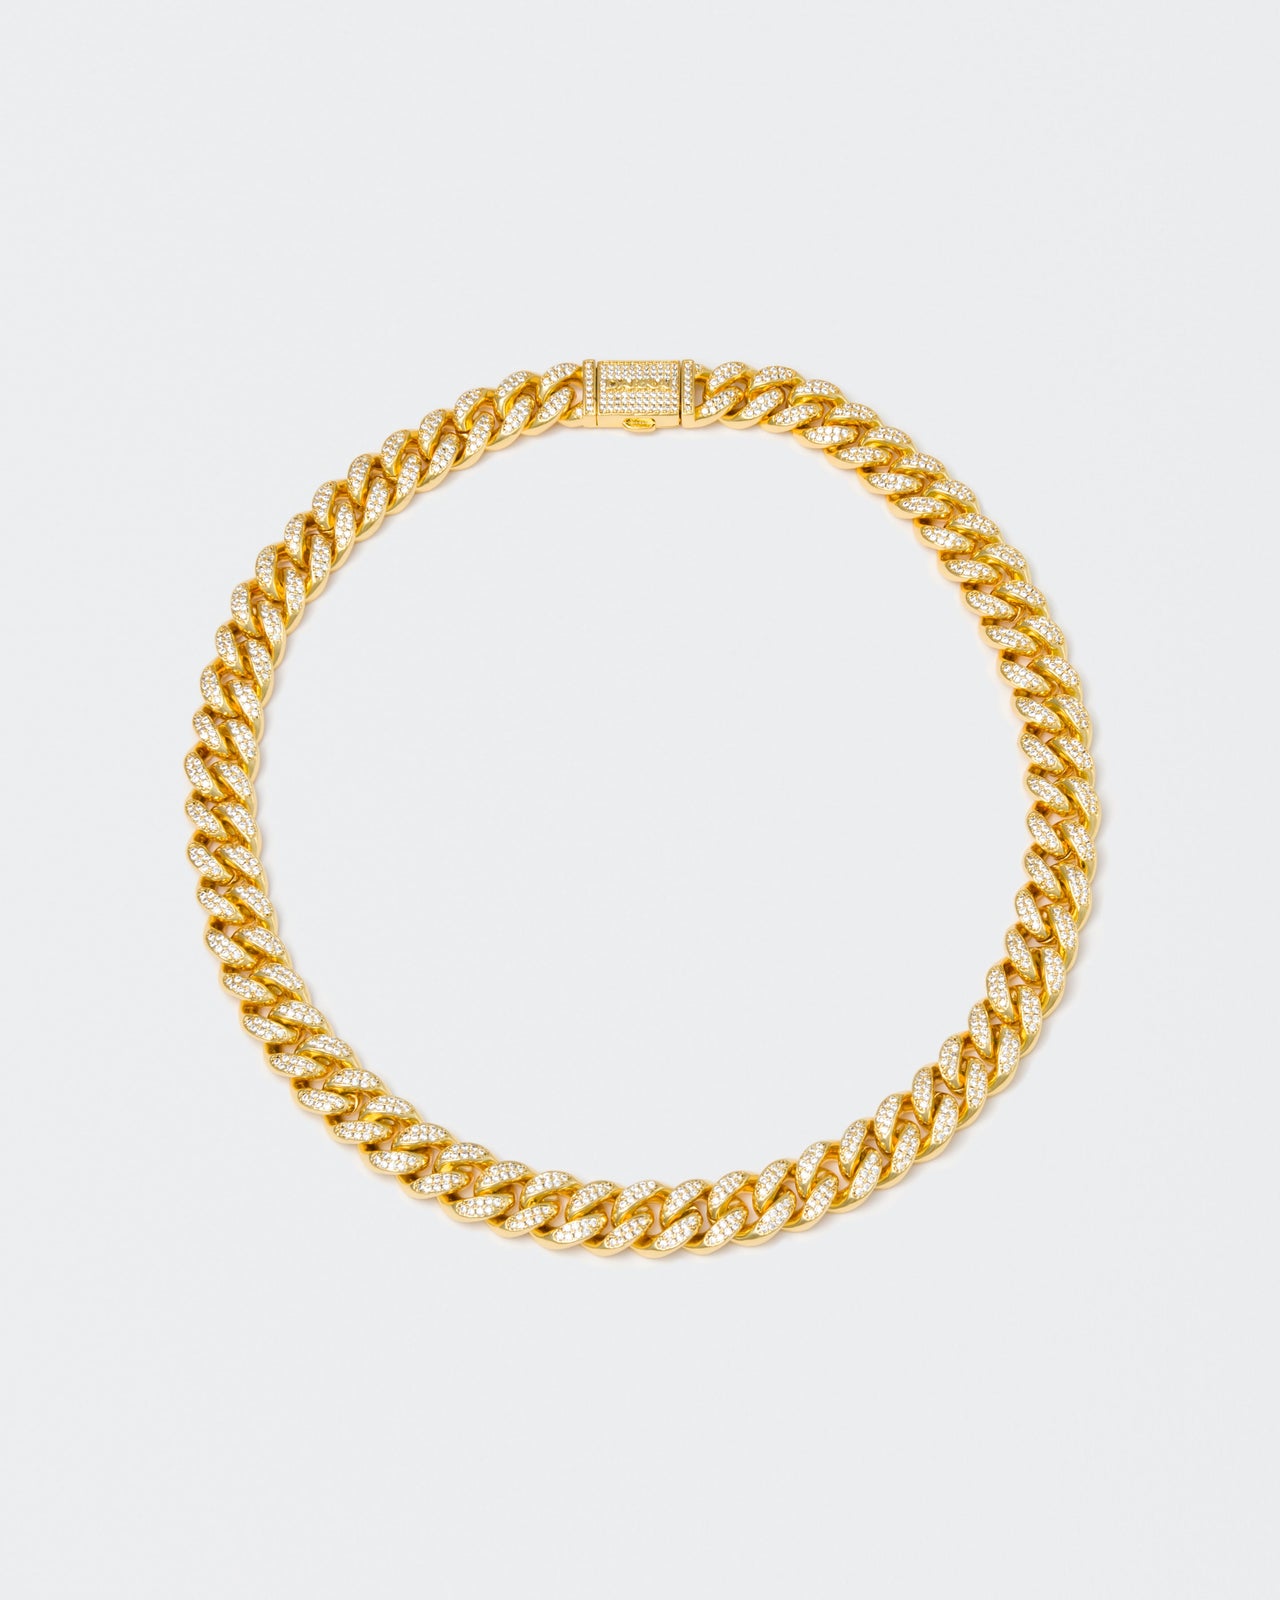 18k yellow gold coated cuban chain necklace with hand-set micropavé stones in white